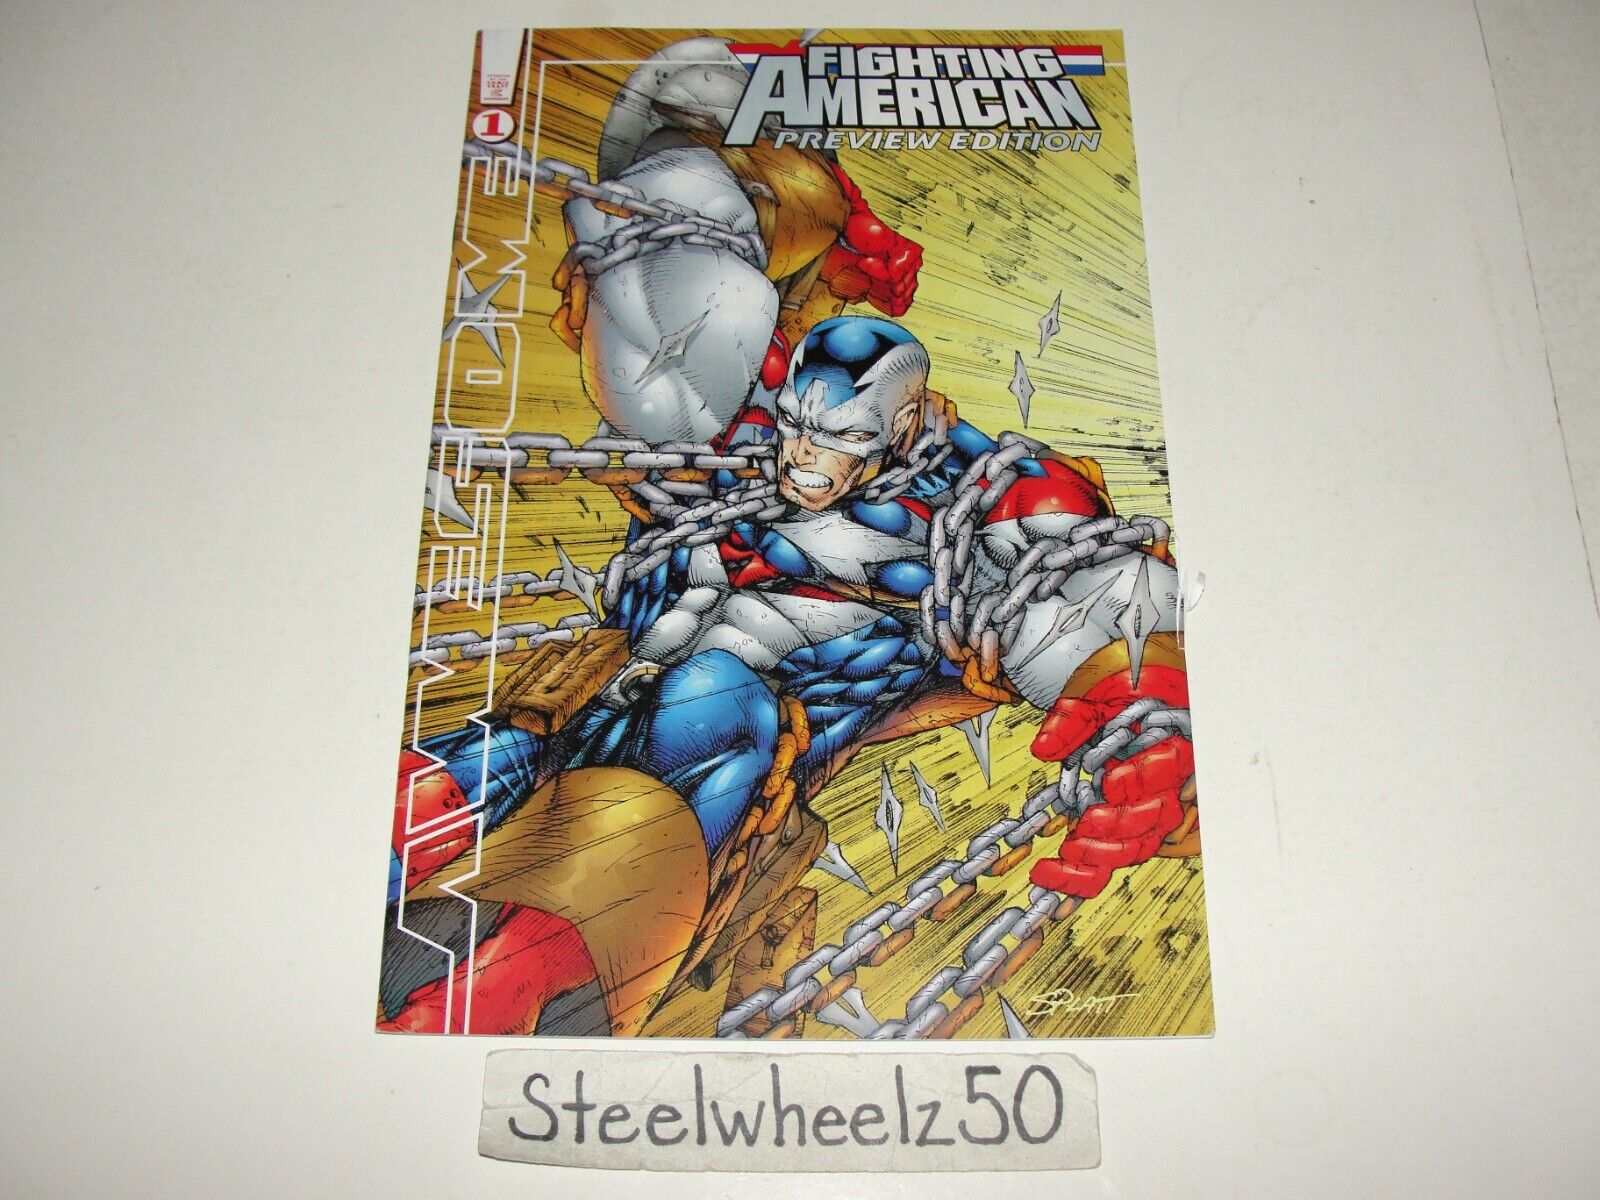 Fighting American Convention Preview Edition #1 Comic 1998 Awesome Stephen Platt